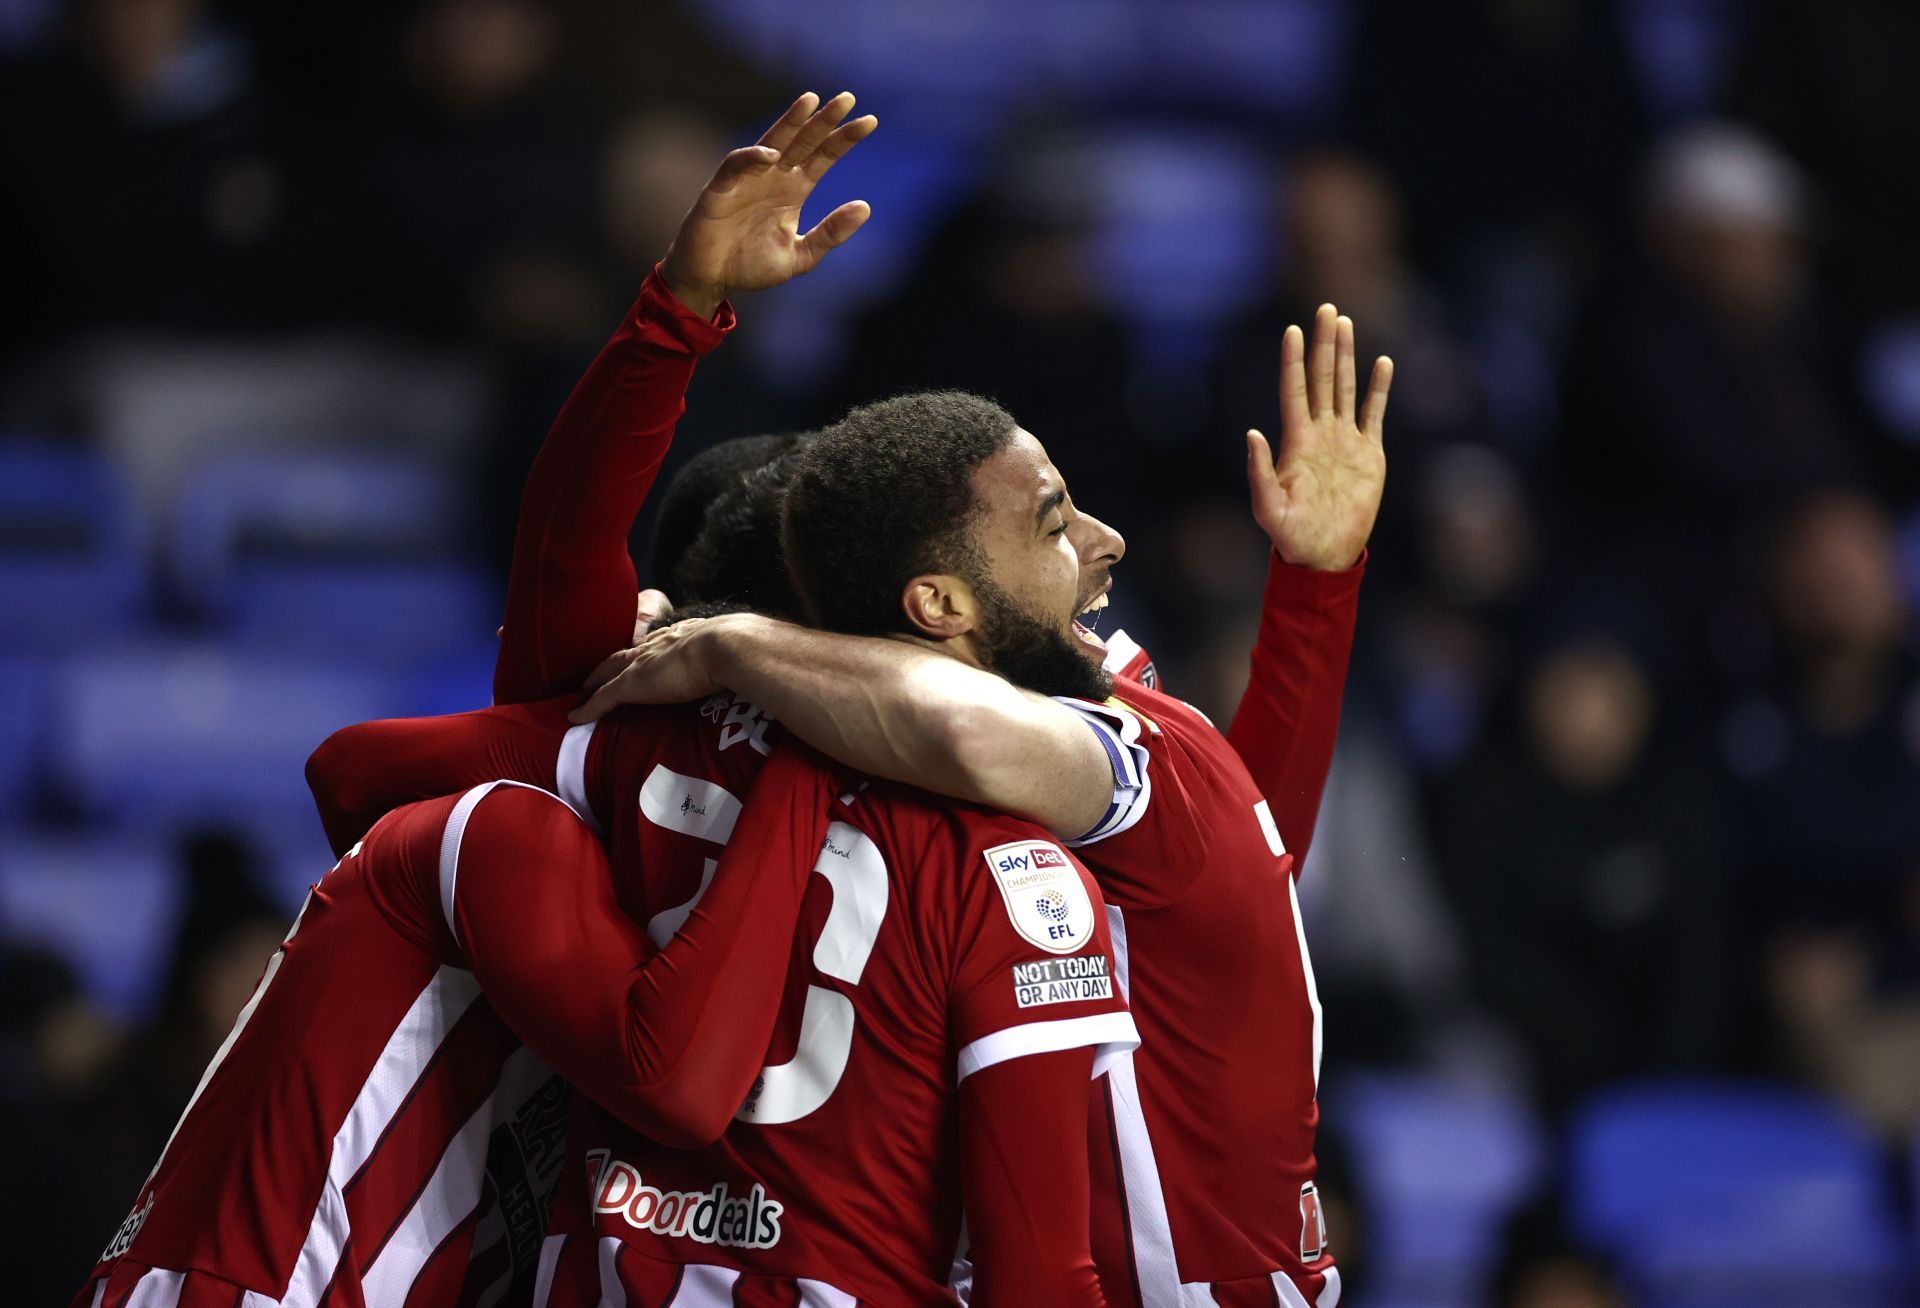 Sheffield United will look to win the game